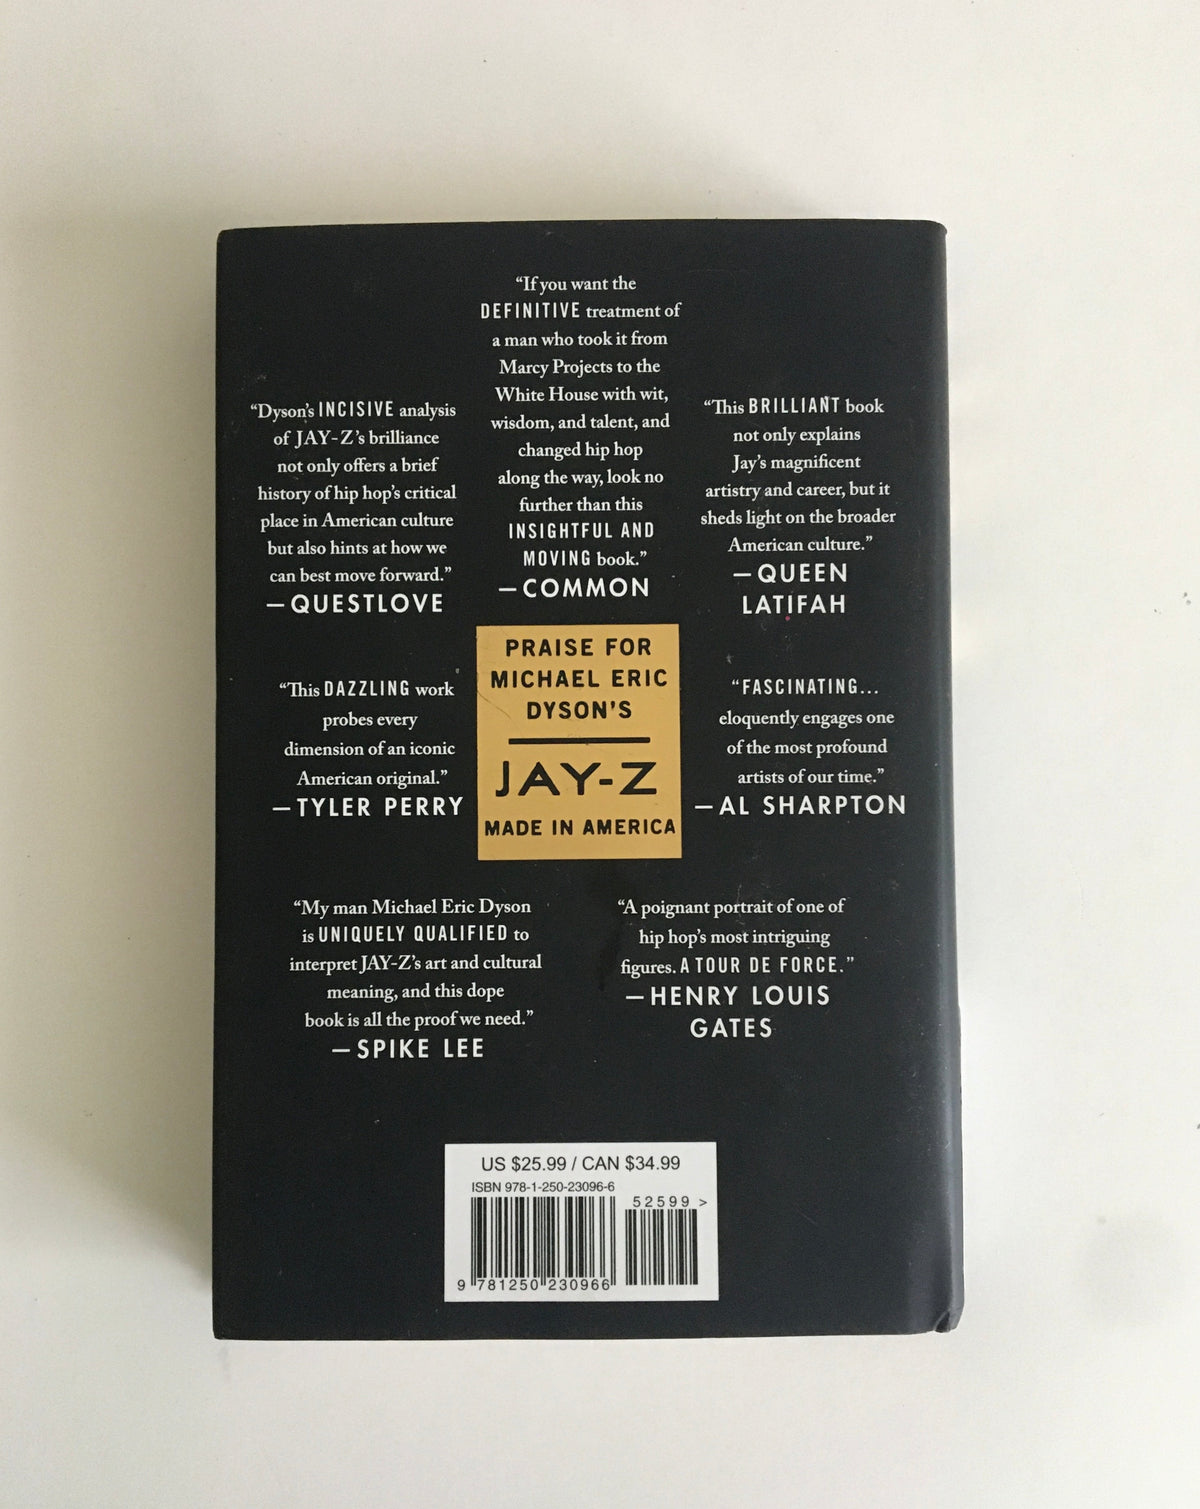 JAY-Z: Made in America by Michael Eric Dyson